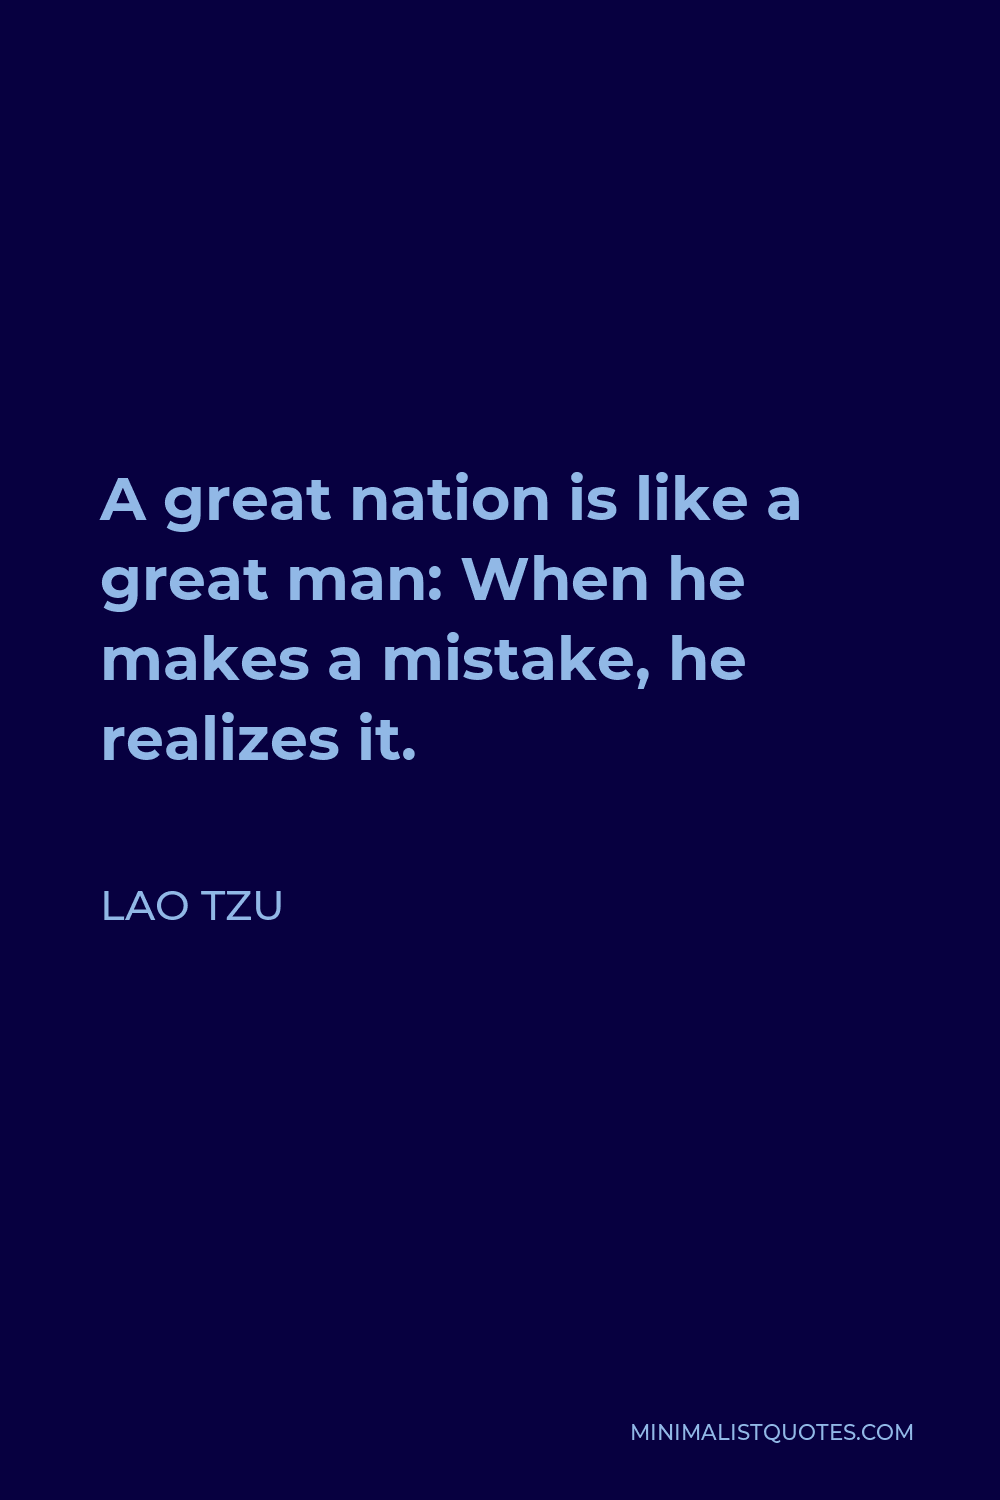 Lao Tzu Quote - A great nation is like a great man: When he makes a mistake, he realizes it.